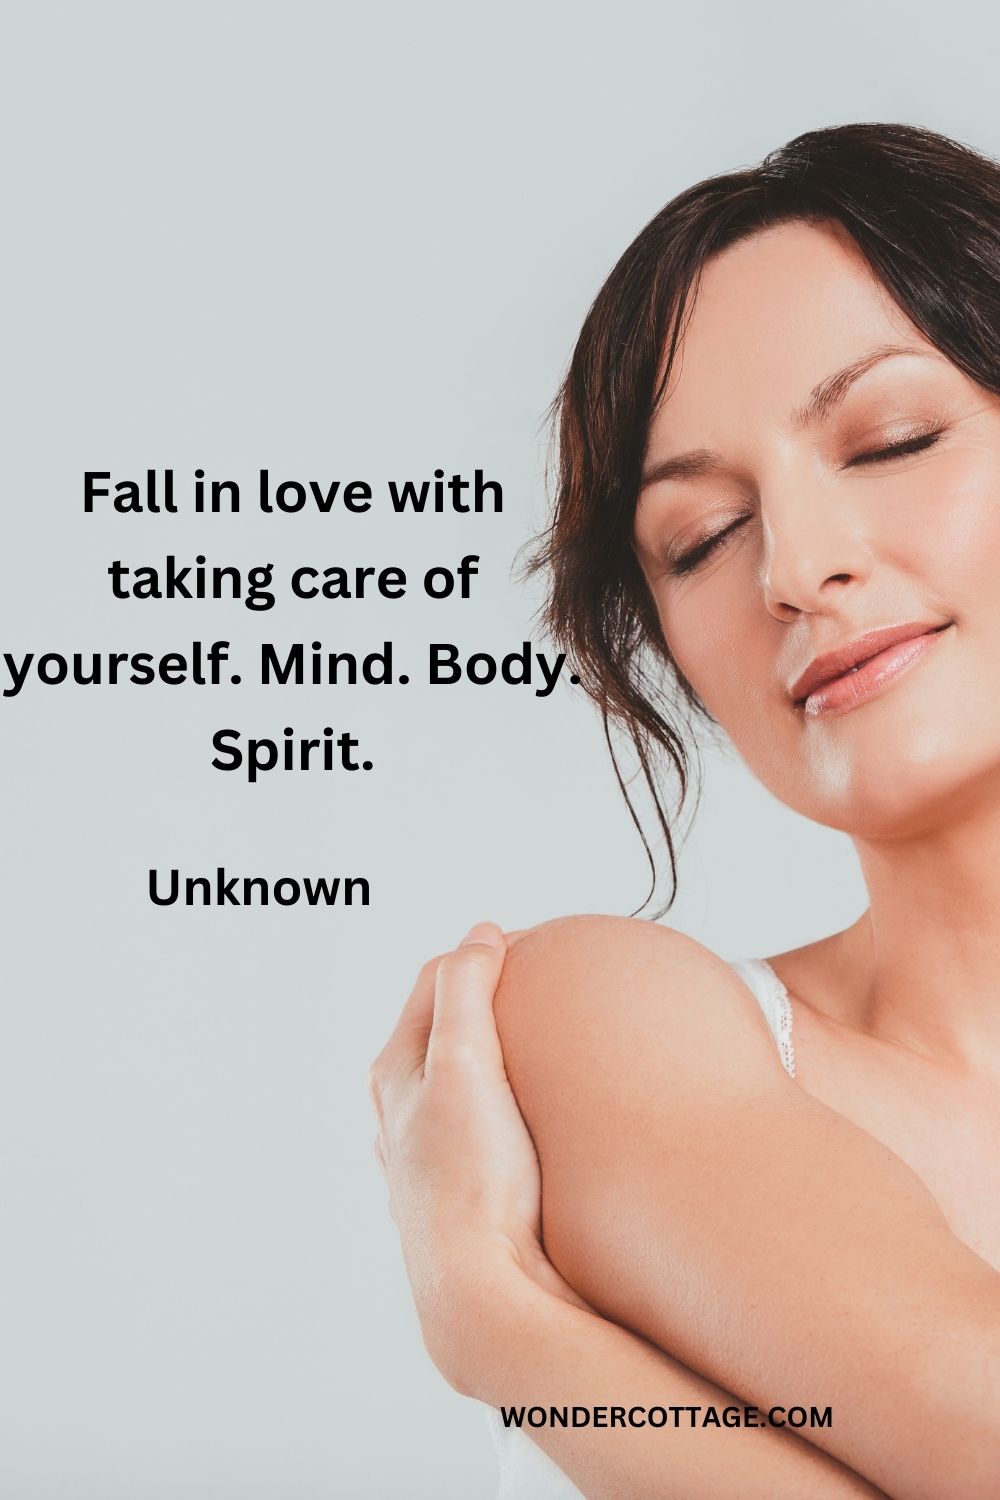 Fall in love with taking care of yourself. Mind. Body. Spirit. Unknown